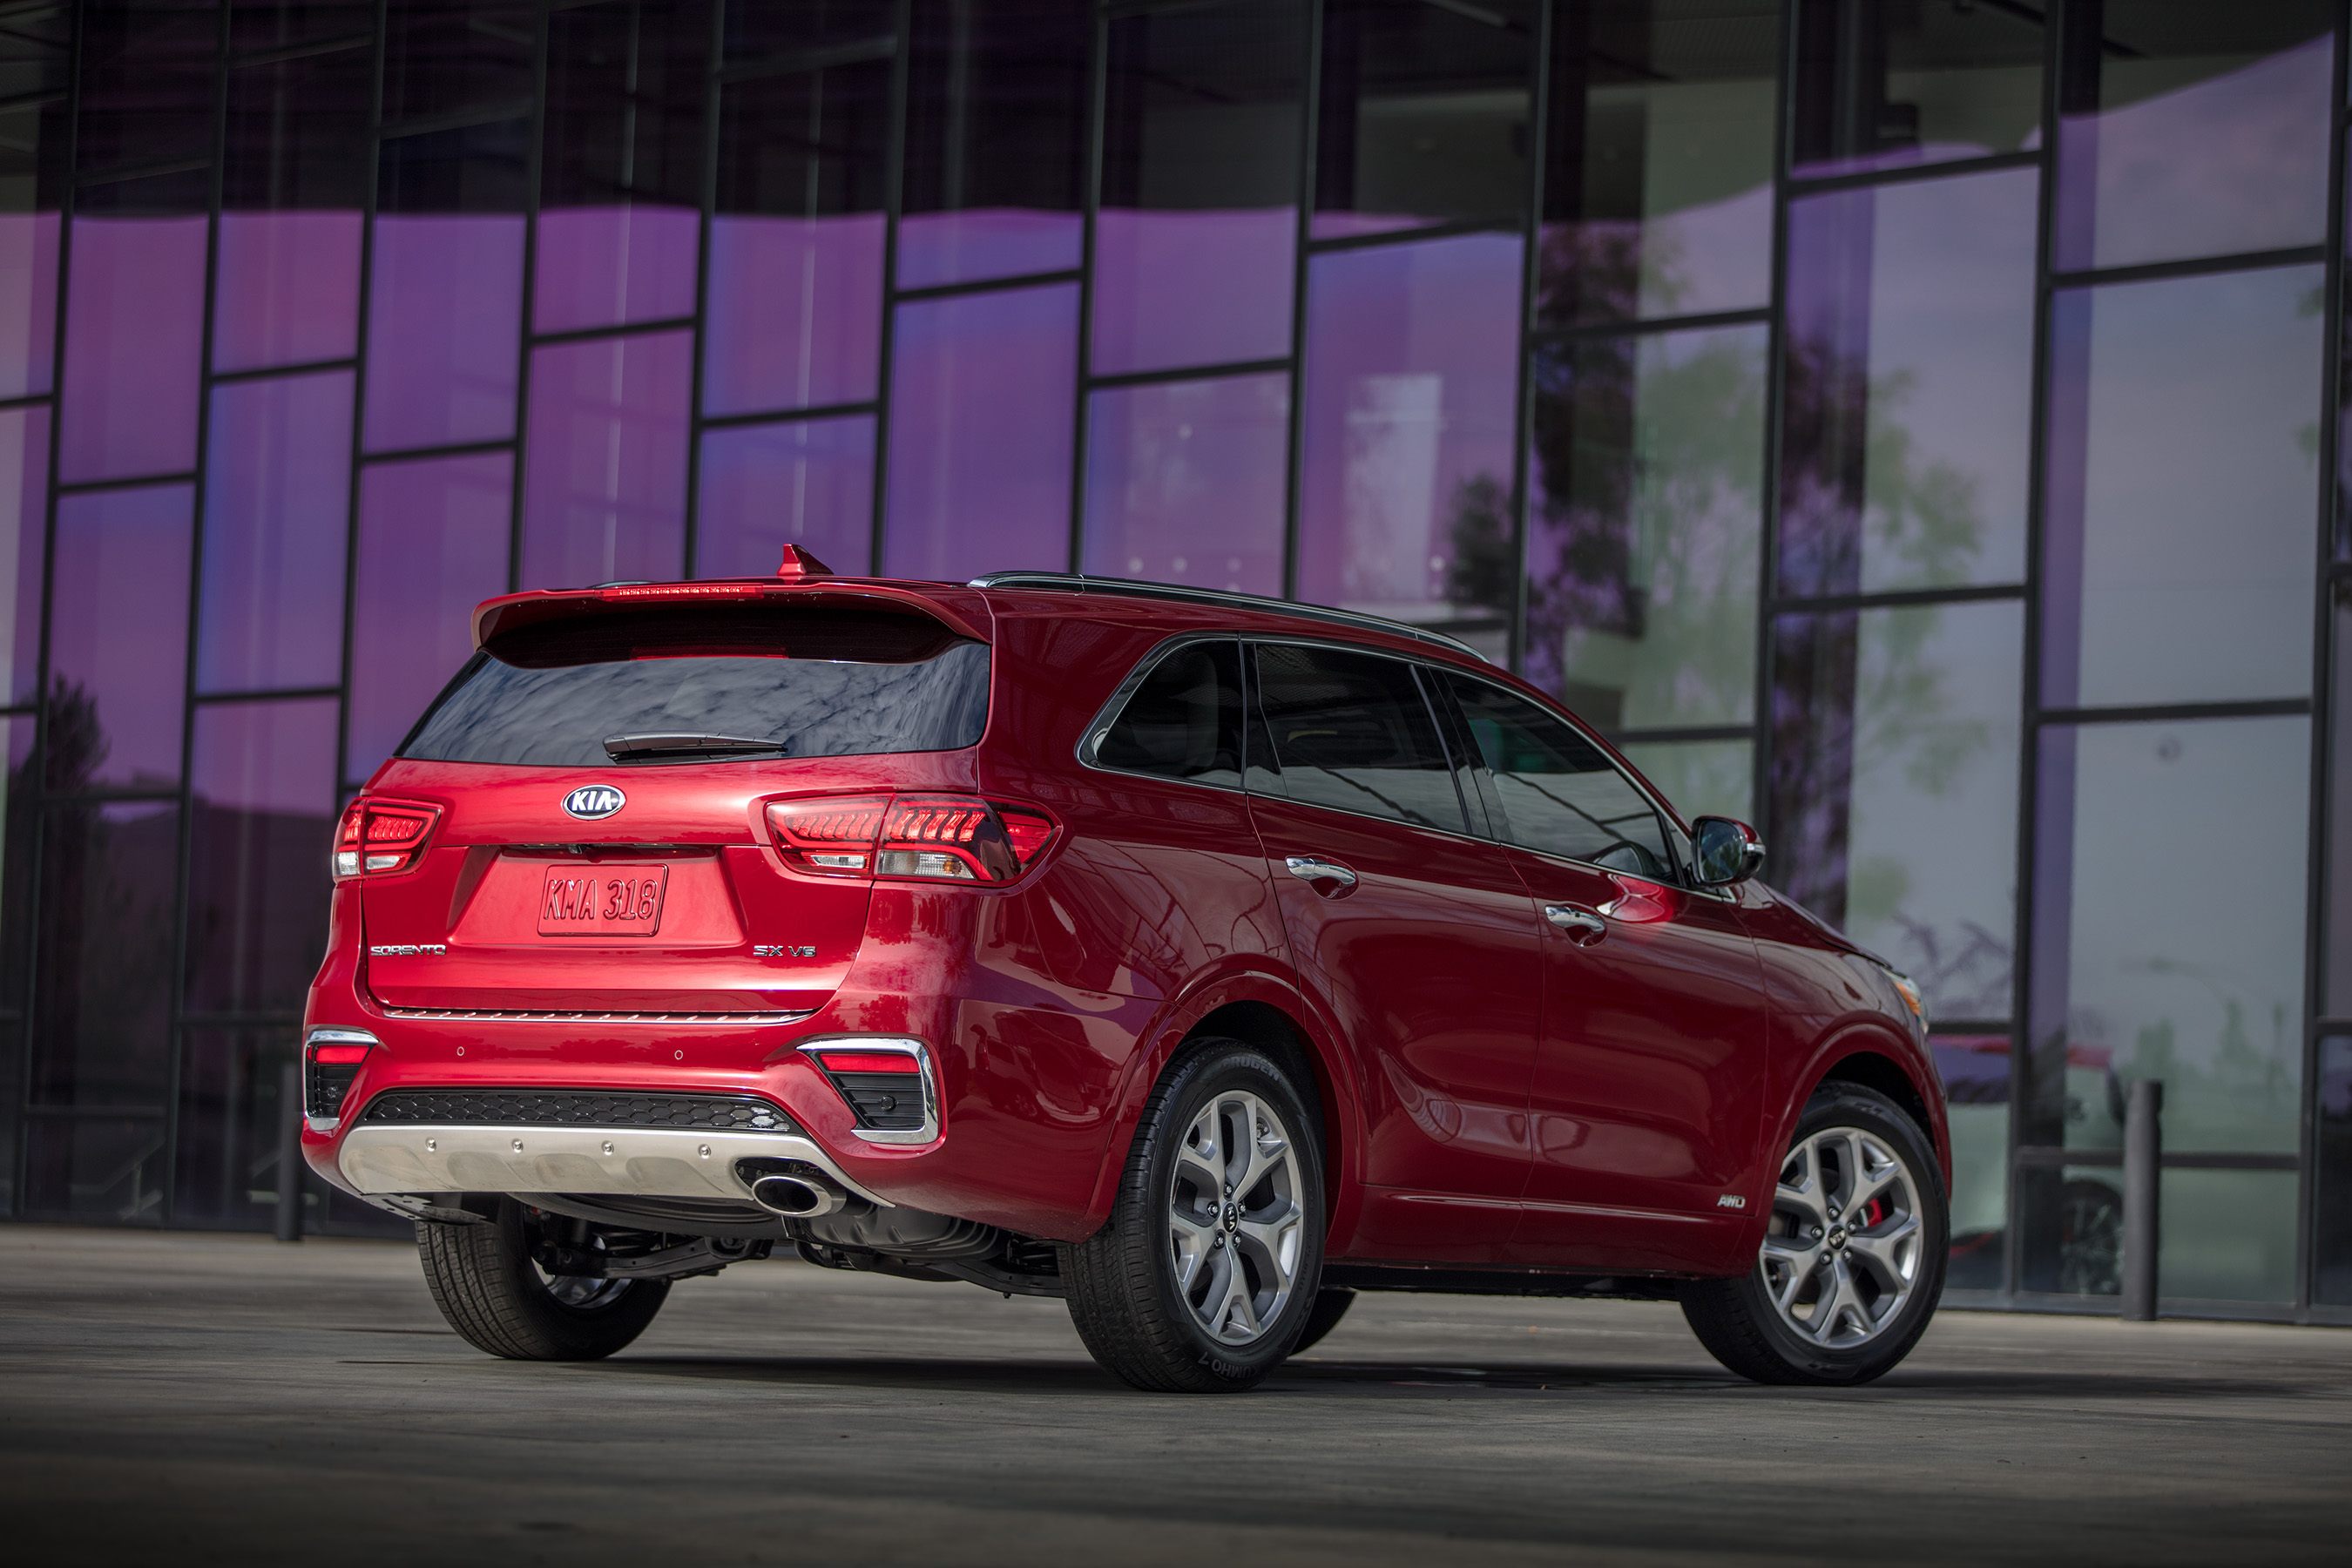 The rear fascia of 2019 Sorento SUV has a new bumper design, sleeker taillamps, revised liftgate and a sportier muffler tip.